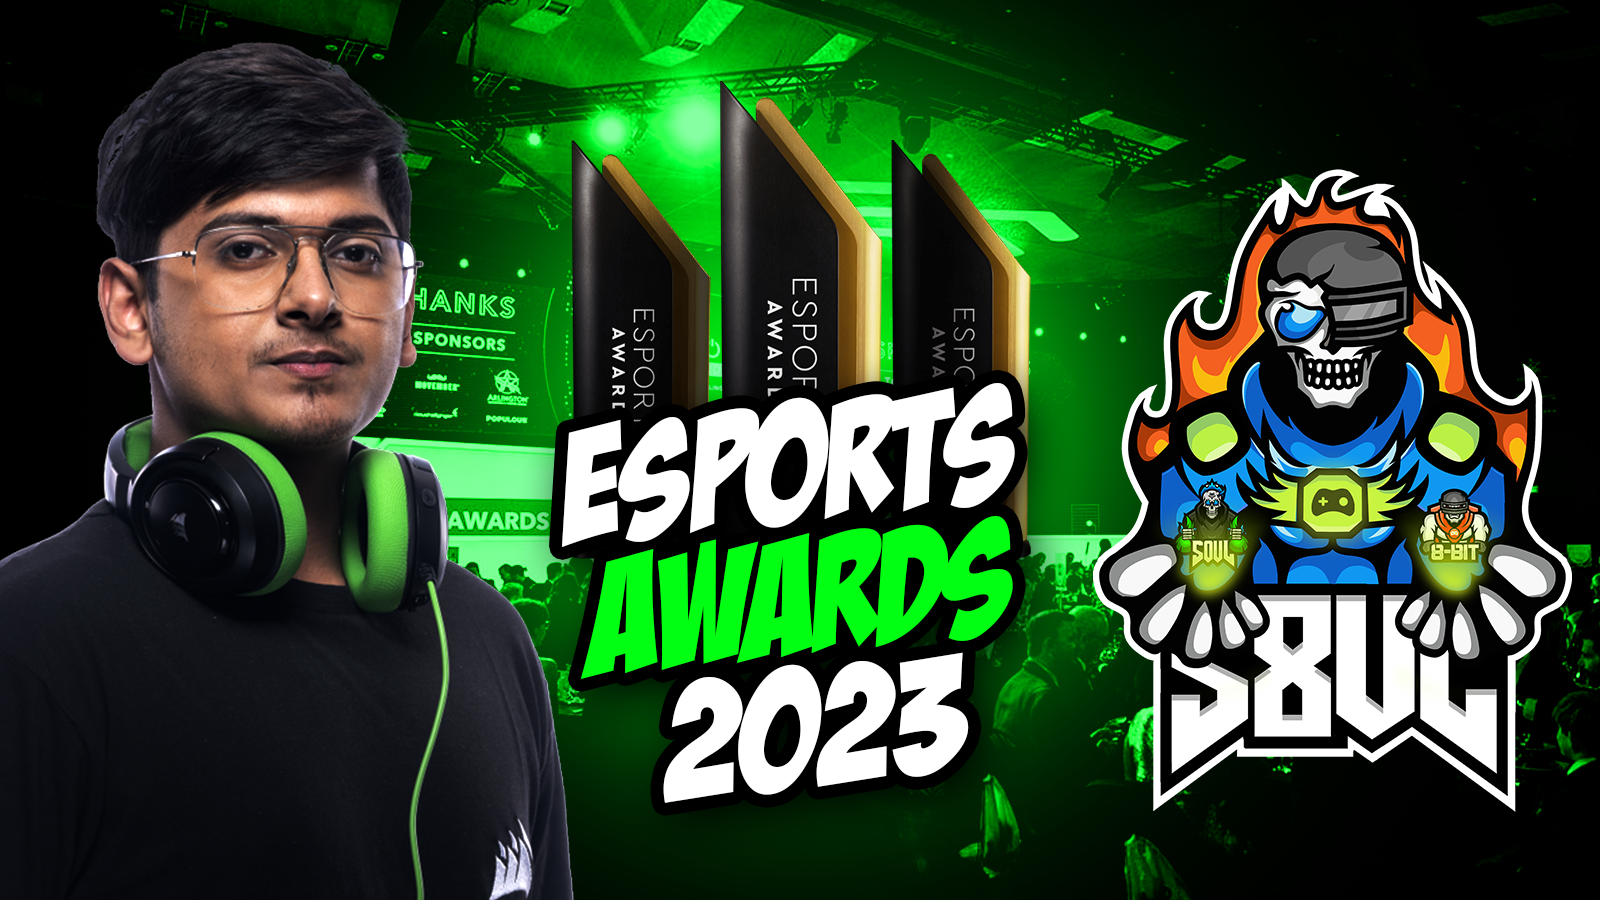 S8UL Esports and Mortal Look to Shine at The Esports Awards 2023 Again